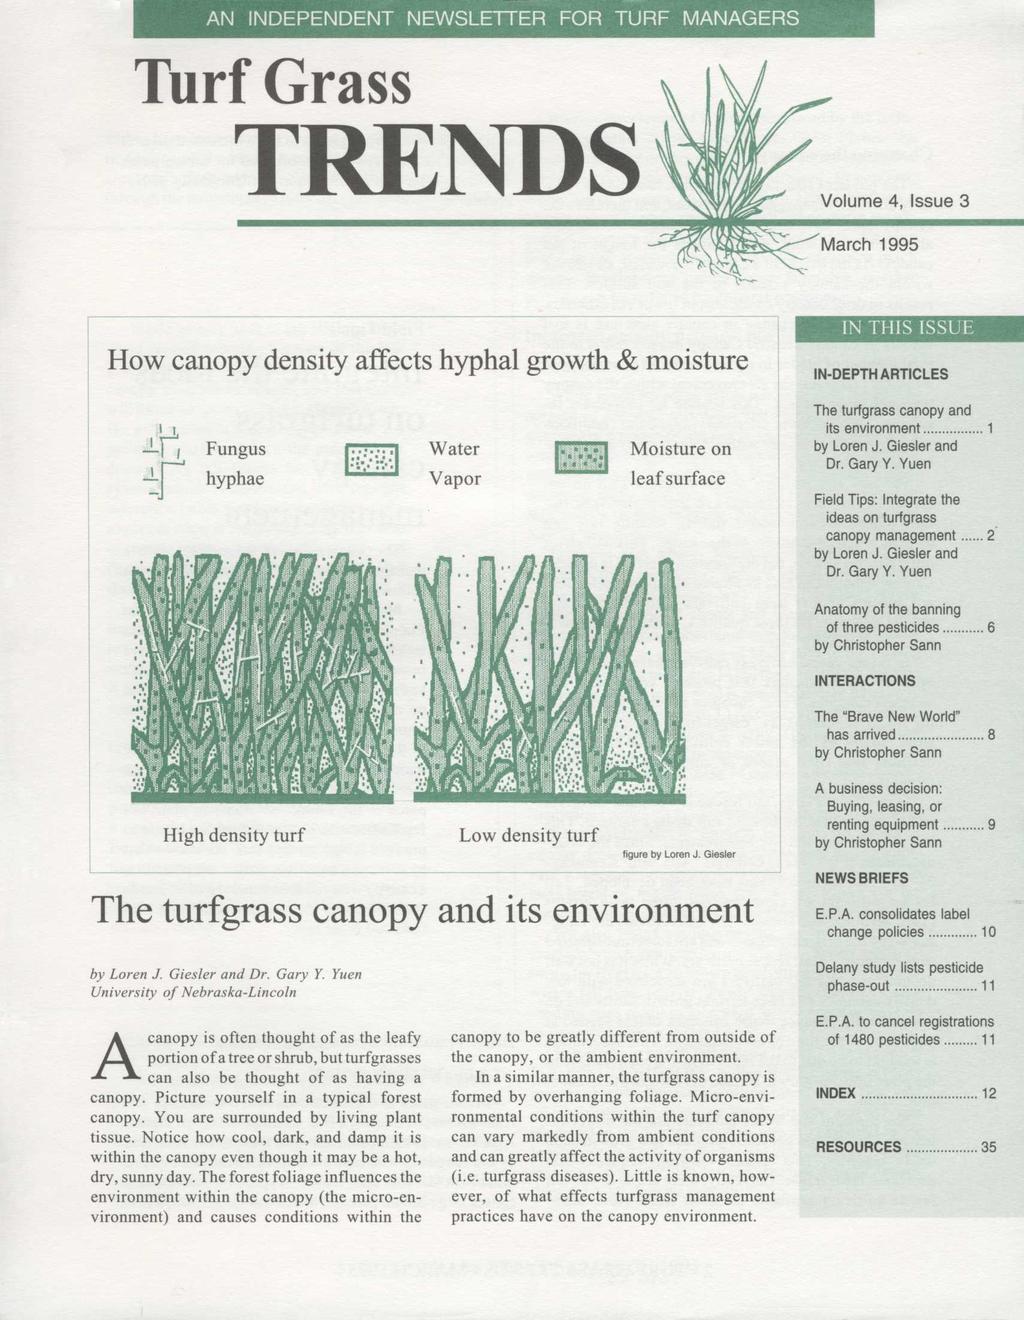 AN INDEPENDENT NEWSLETTER FOR TURF MANAGERS Turf Grass TRENDS Volume 4, Issue 3 March 1995 How canopy density affects hyphal growth & moisture IN THIS ISSUE IN-DEPTH ARTICLES / Fungus hyphae Water